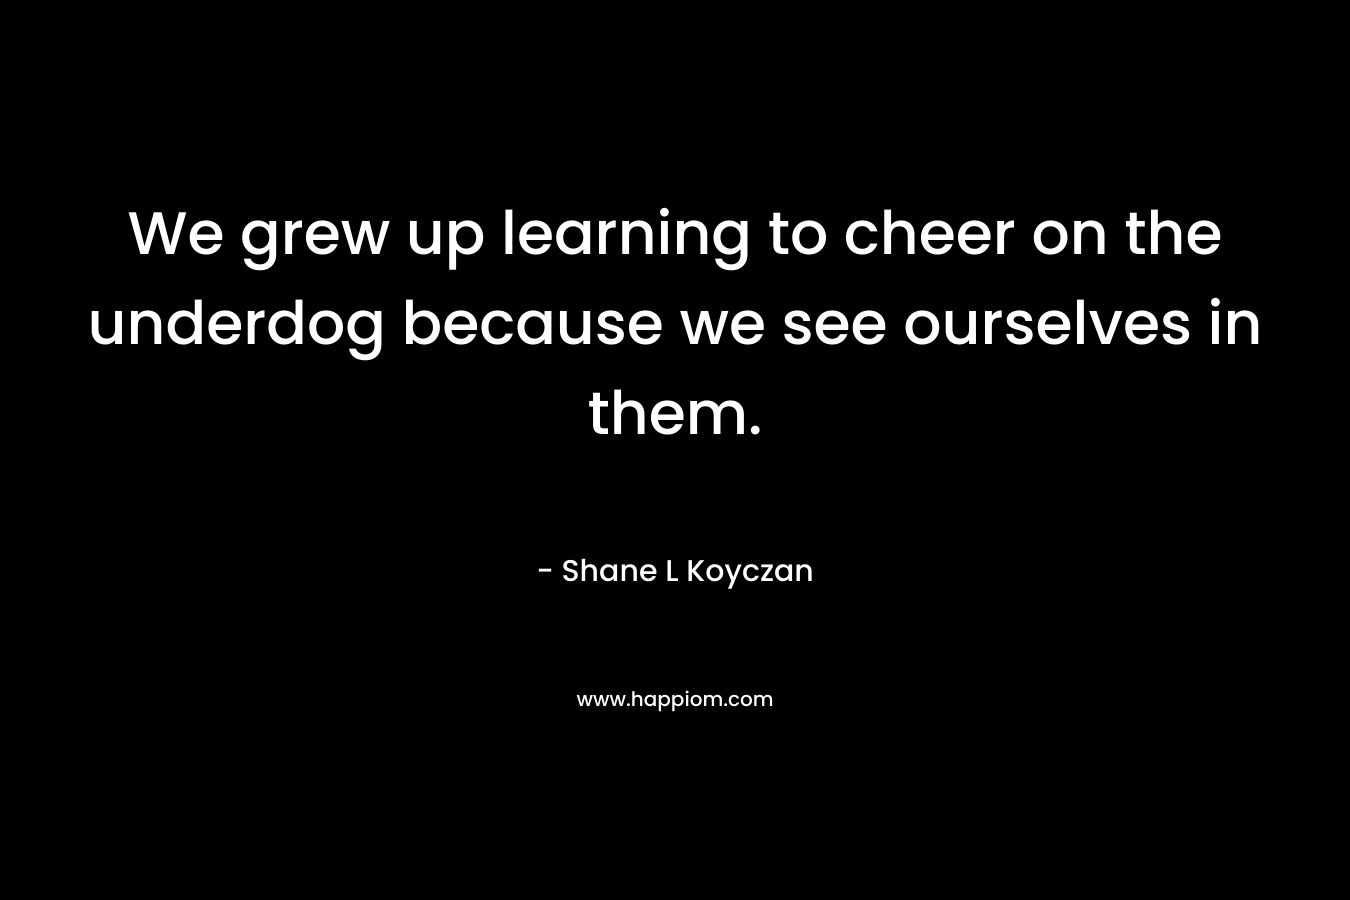 We grew up learning to cheer on the underdog because we see ourselves in them.